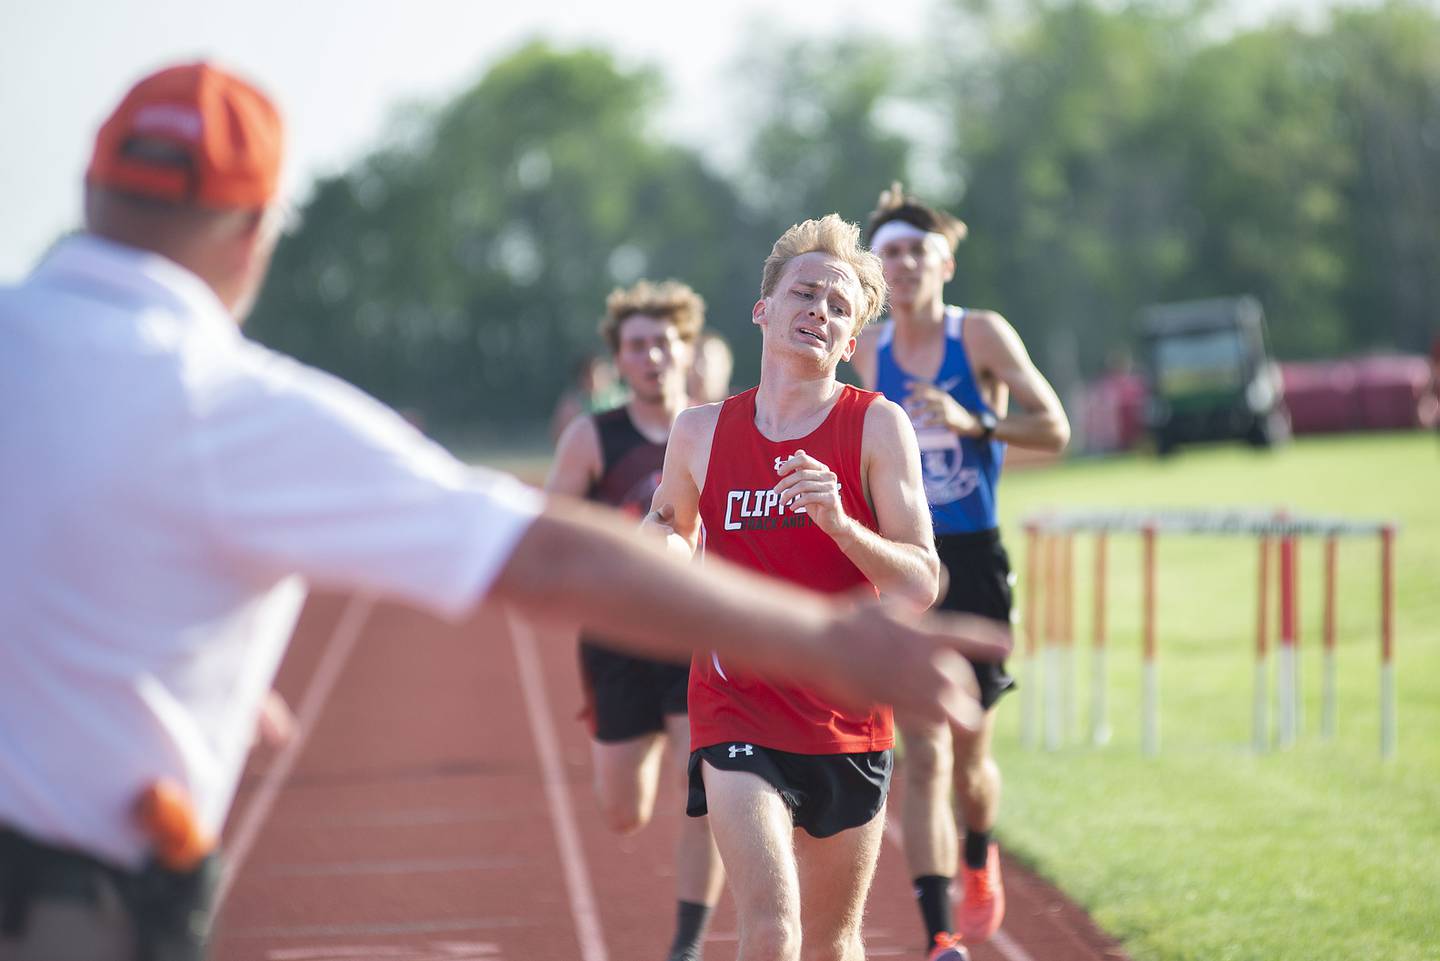 Amboy's Brock Loftus finishes the 3200 run at the class 1A Erie track sectionals on Thursday, May 19, 2022.